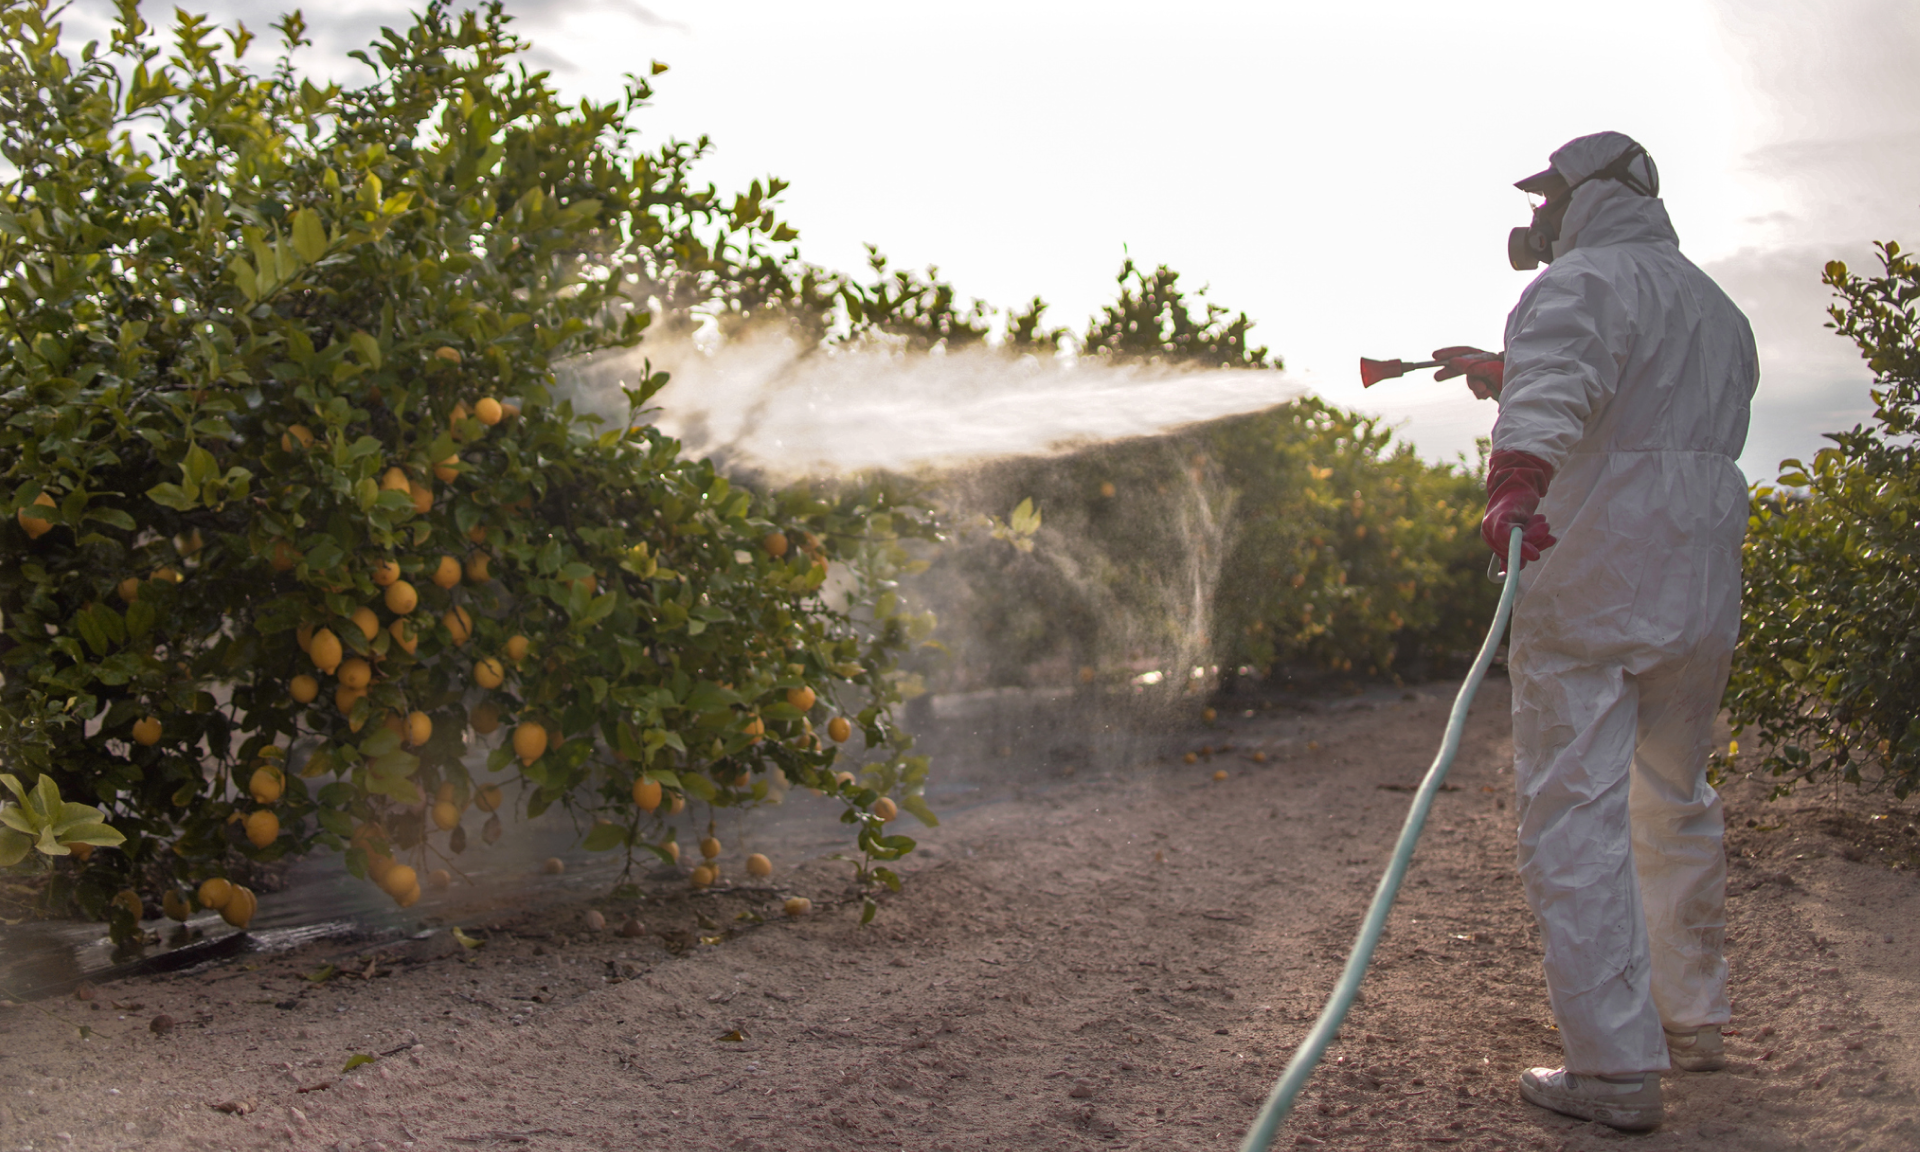 A person a protective white suit spraying a row of fruit with a hose